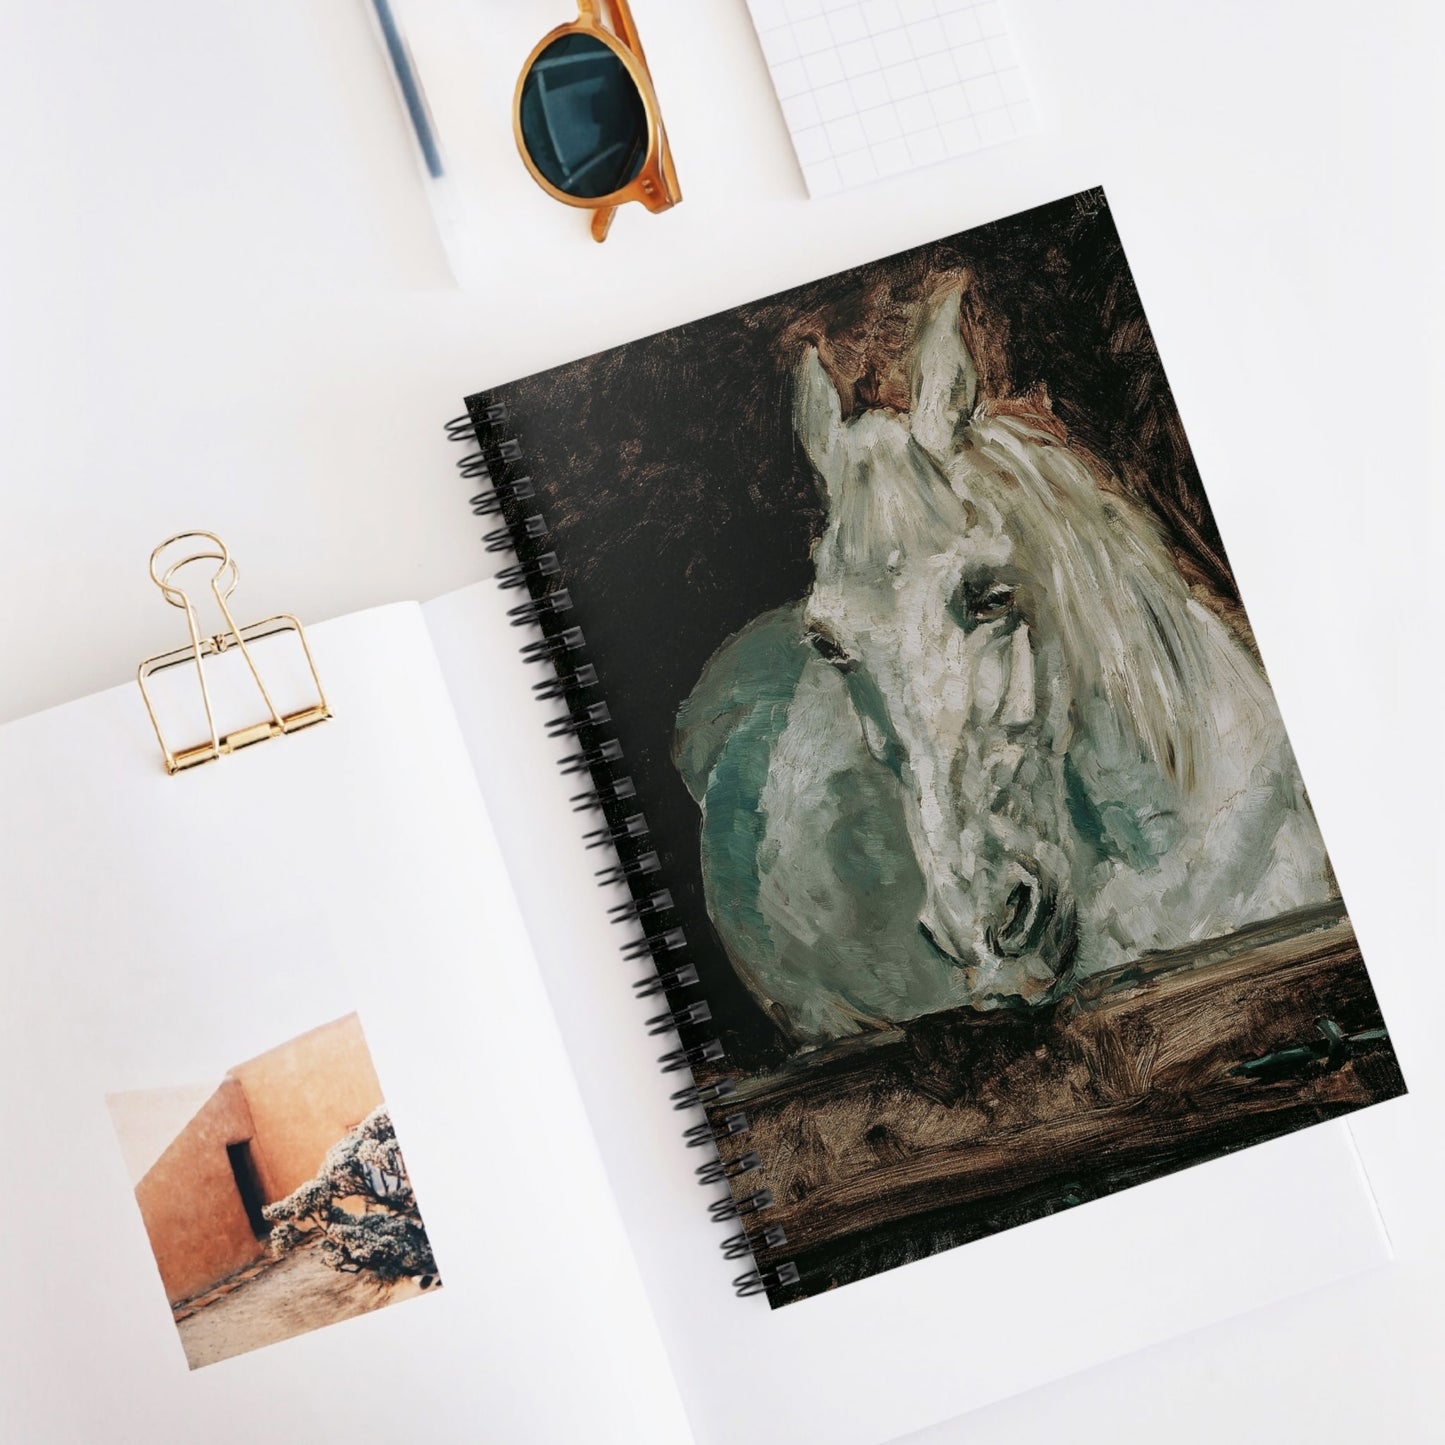 Abstract Wild Animal Spiral Notebook Displayed on Desk